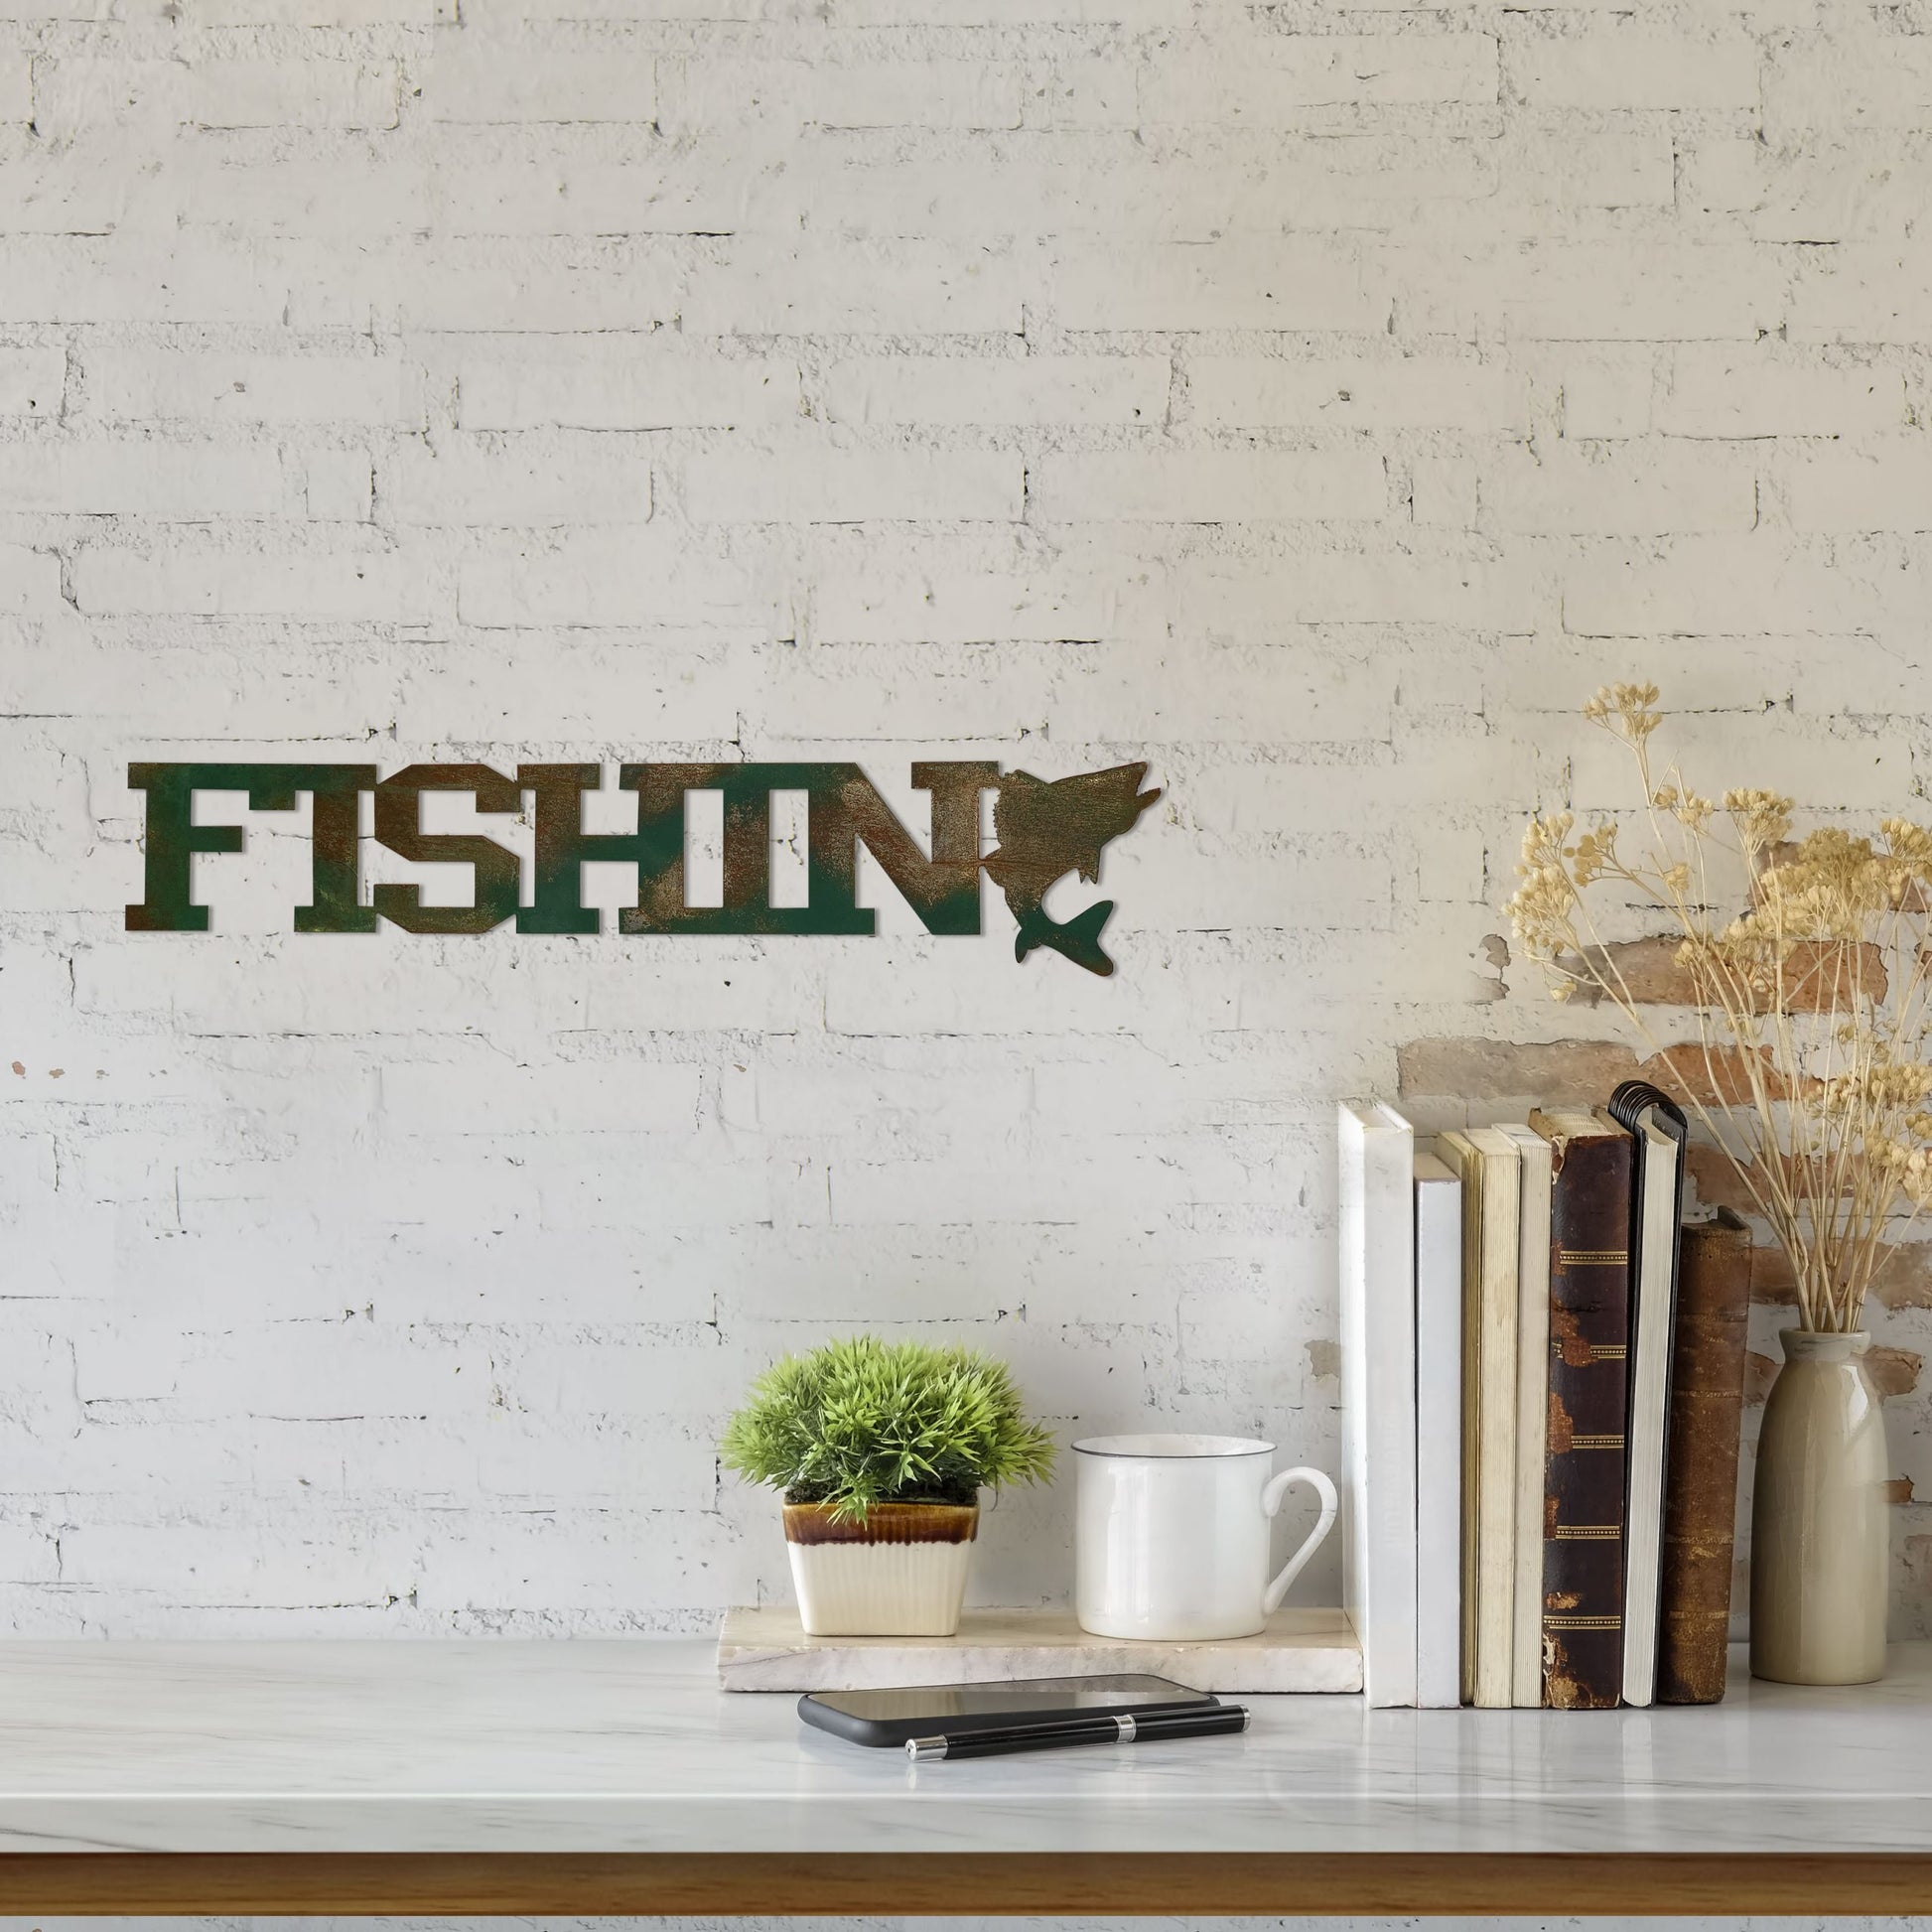 fishing-word-over-counter-scaled-1